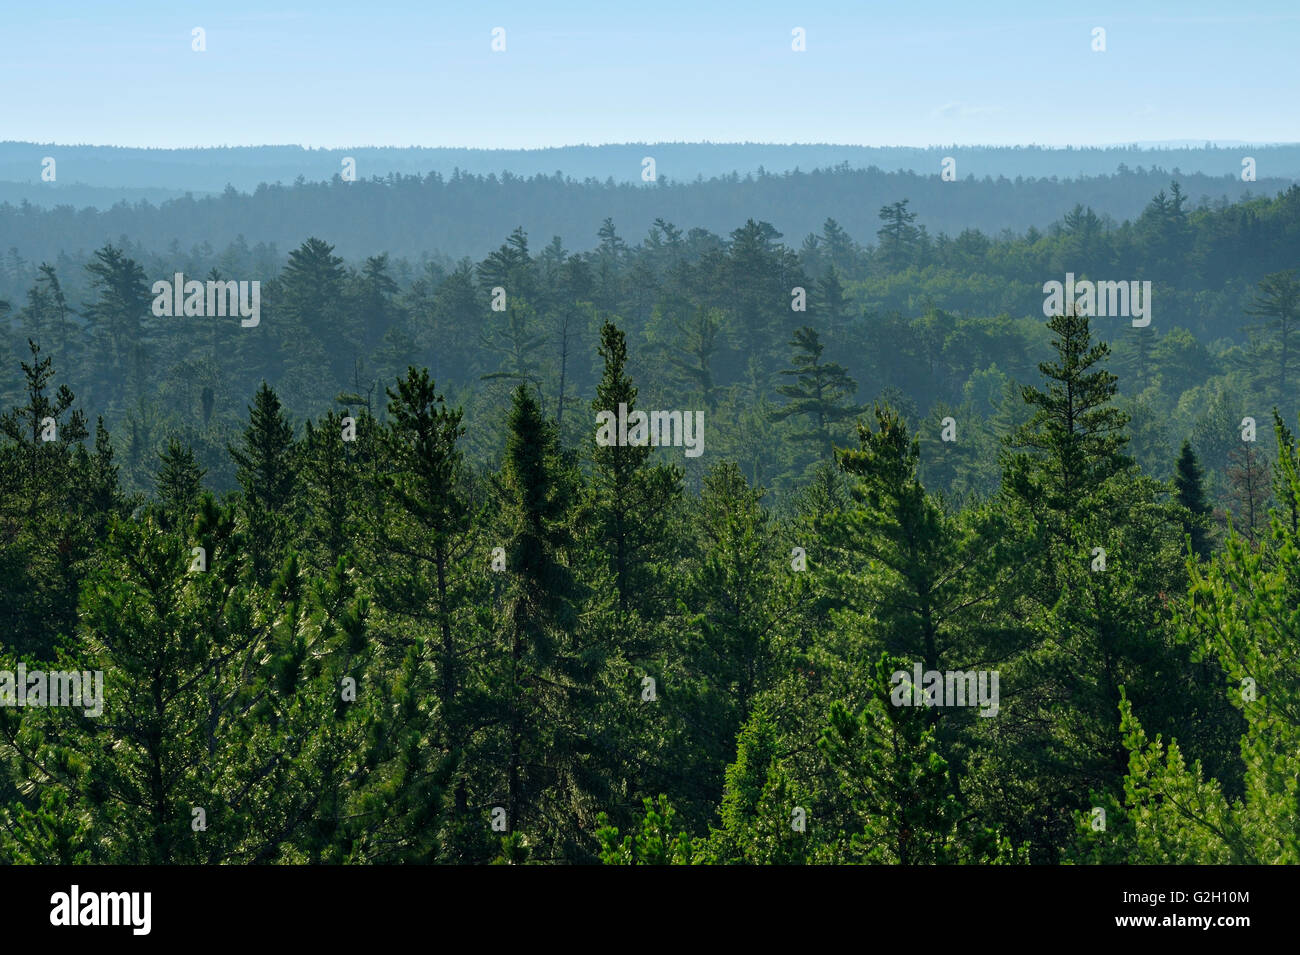 Old growth pine trees in White Bear Forest Temagami Ontario Canada Stock Photo